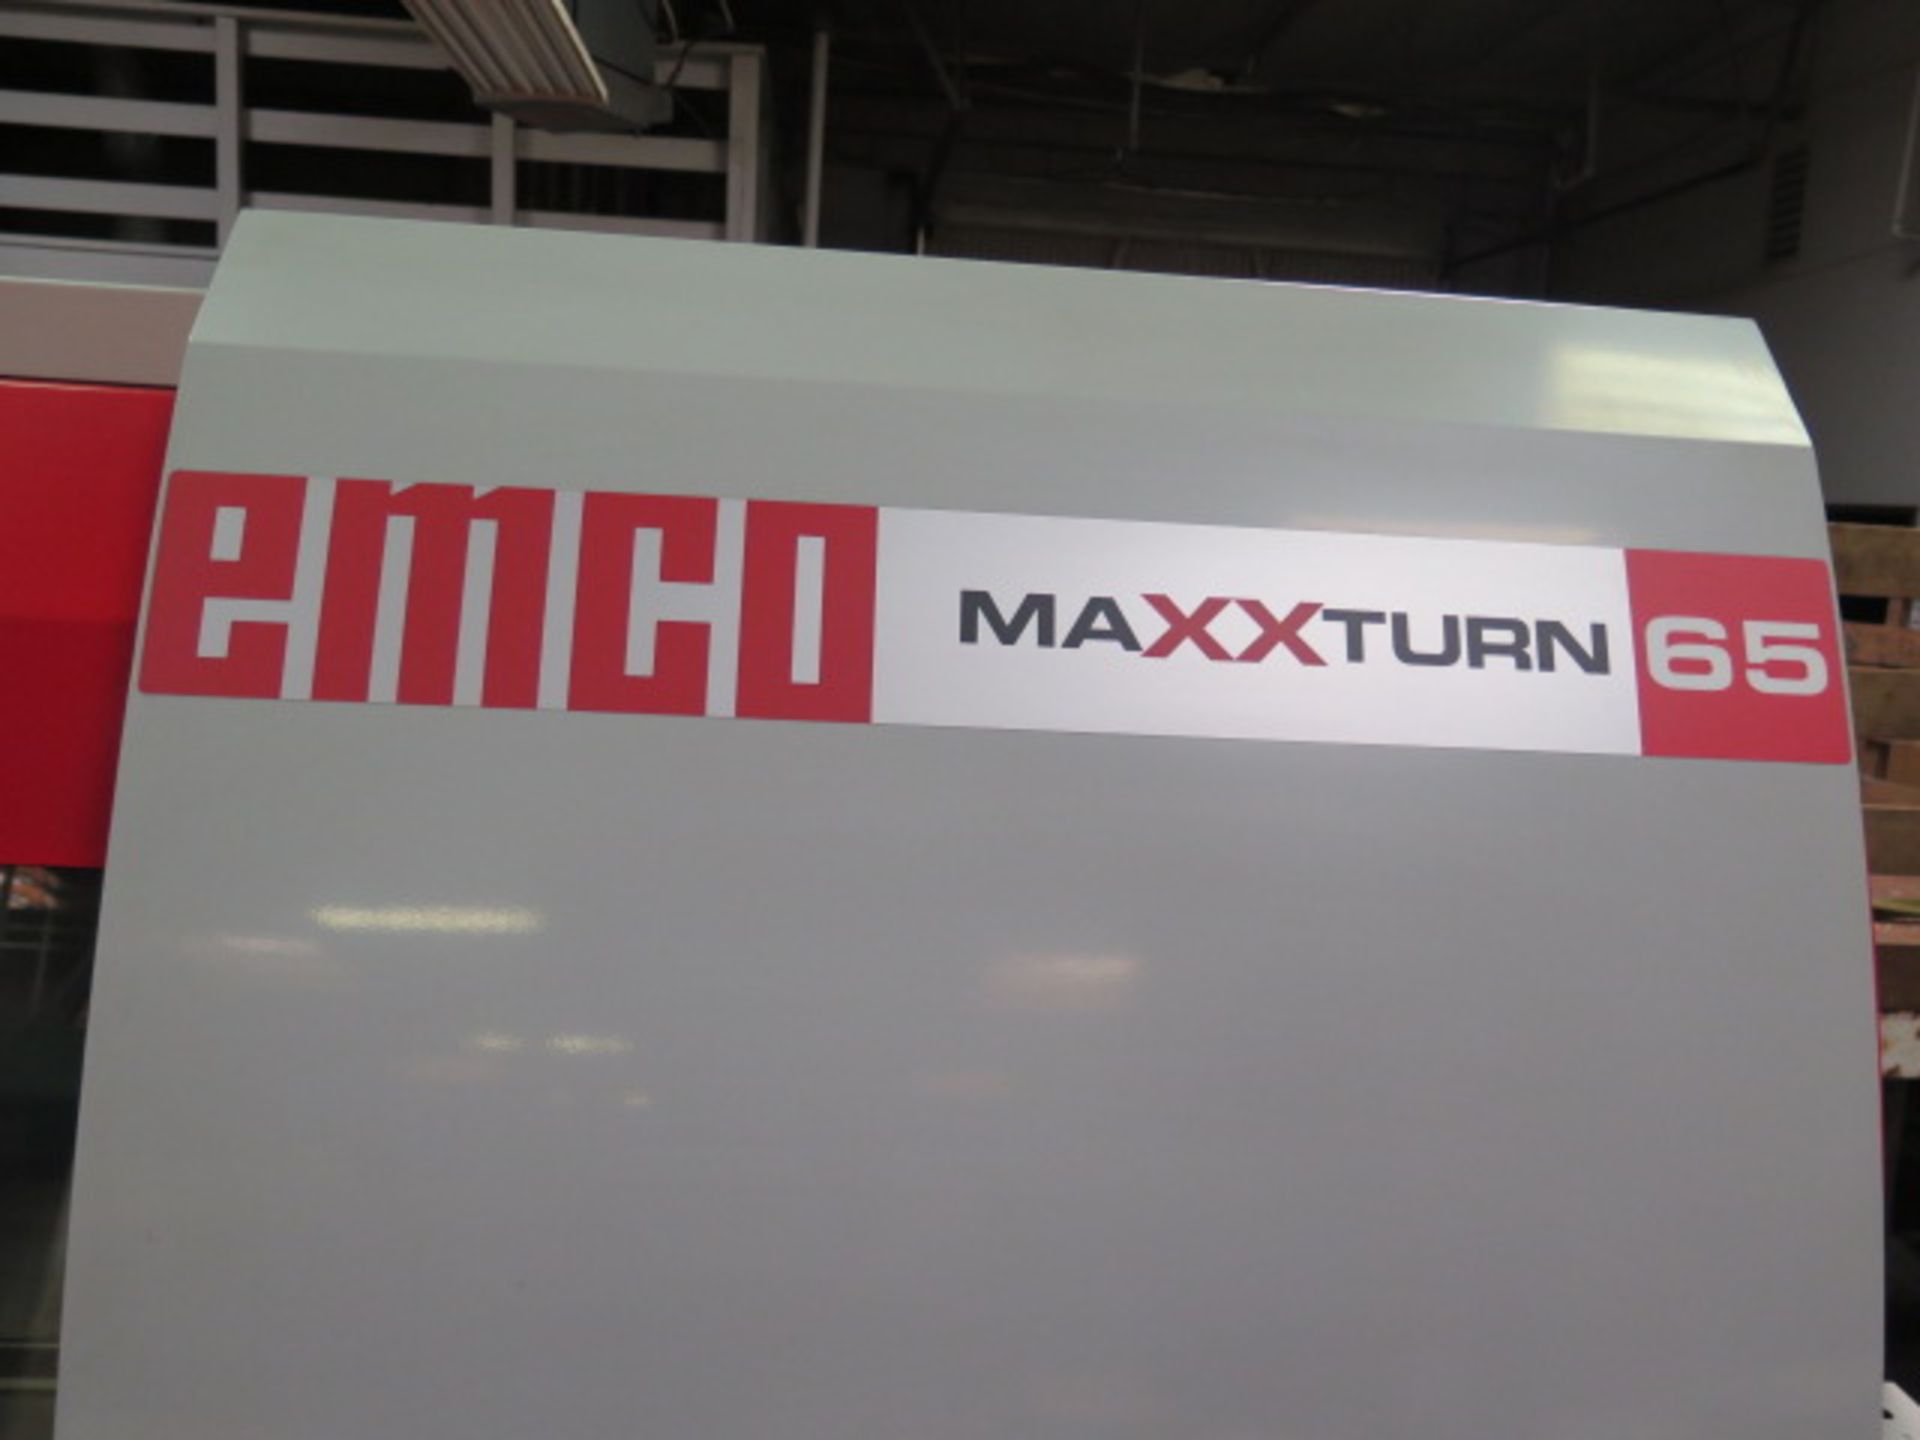 2007 Emco MaxxTurn 65 Twin Spindle, Live Turret CNC Turning Center s/n S6F-V03/S6BV-2559, SOLD AS IS - Image 15 of 16